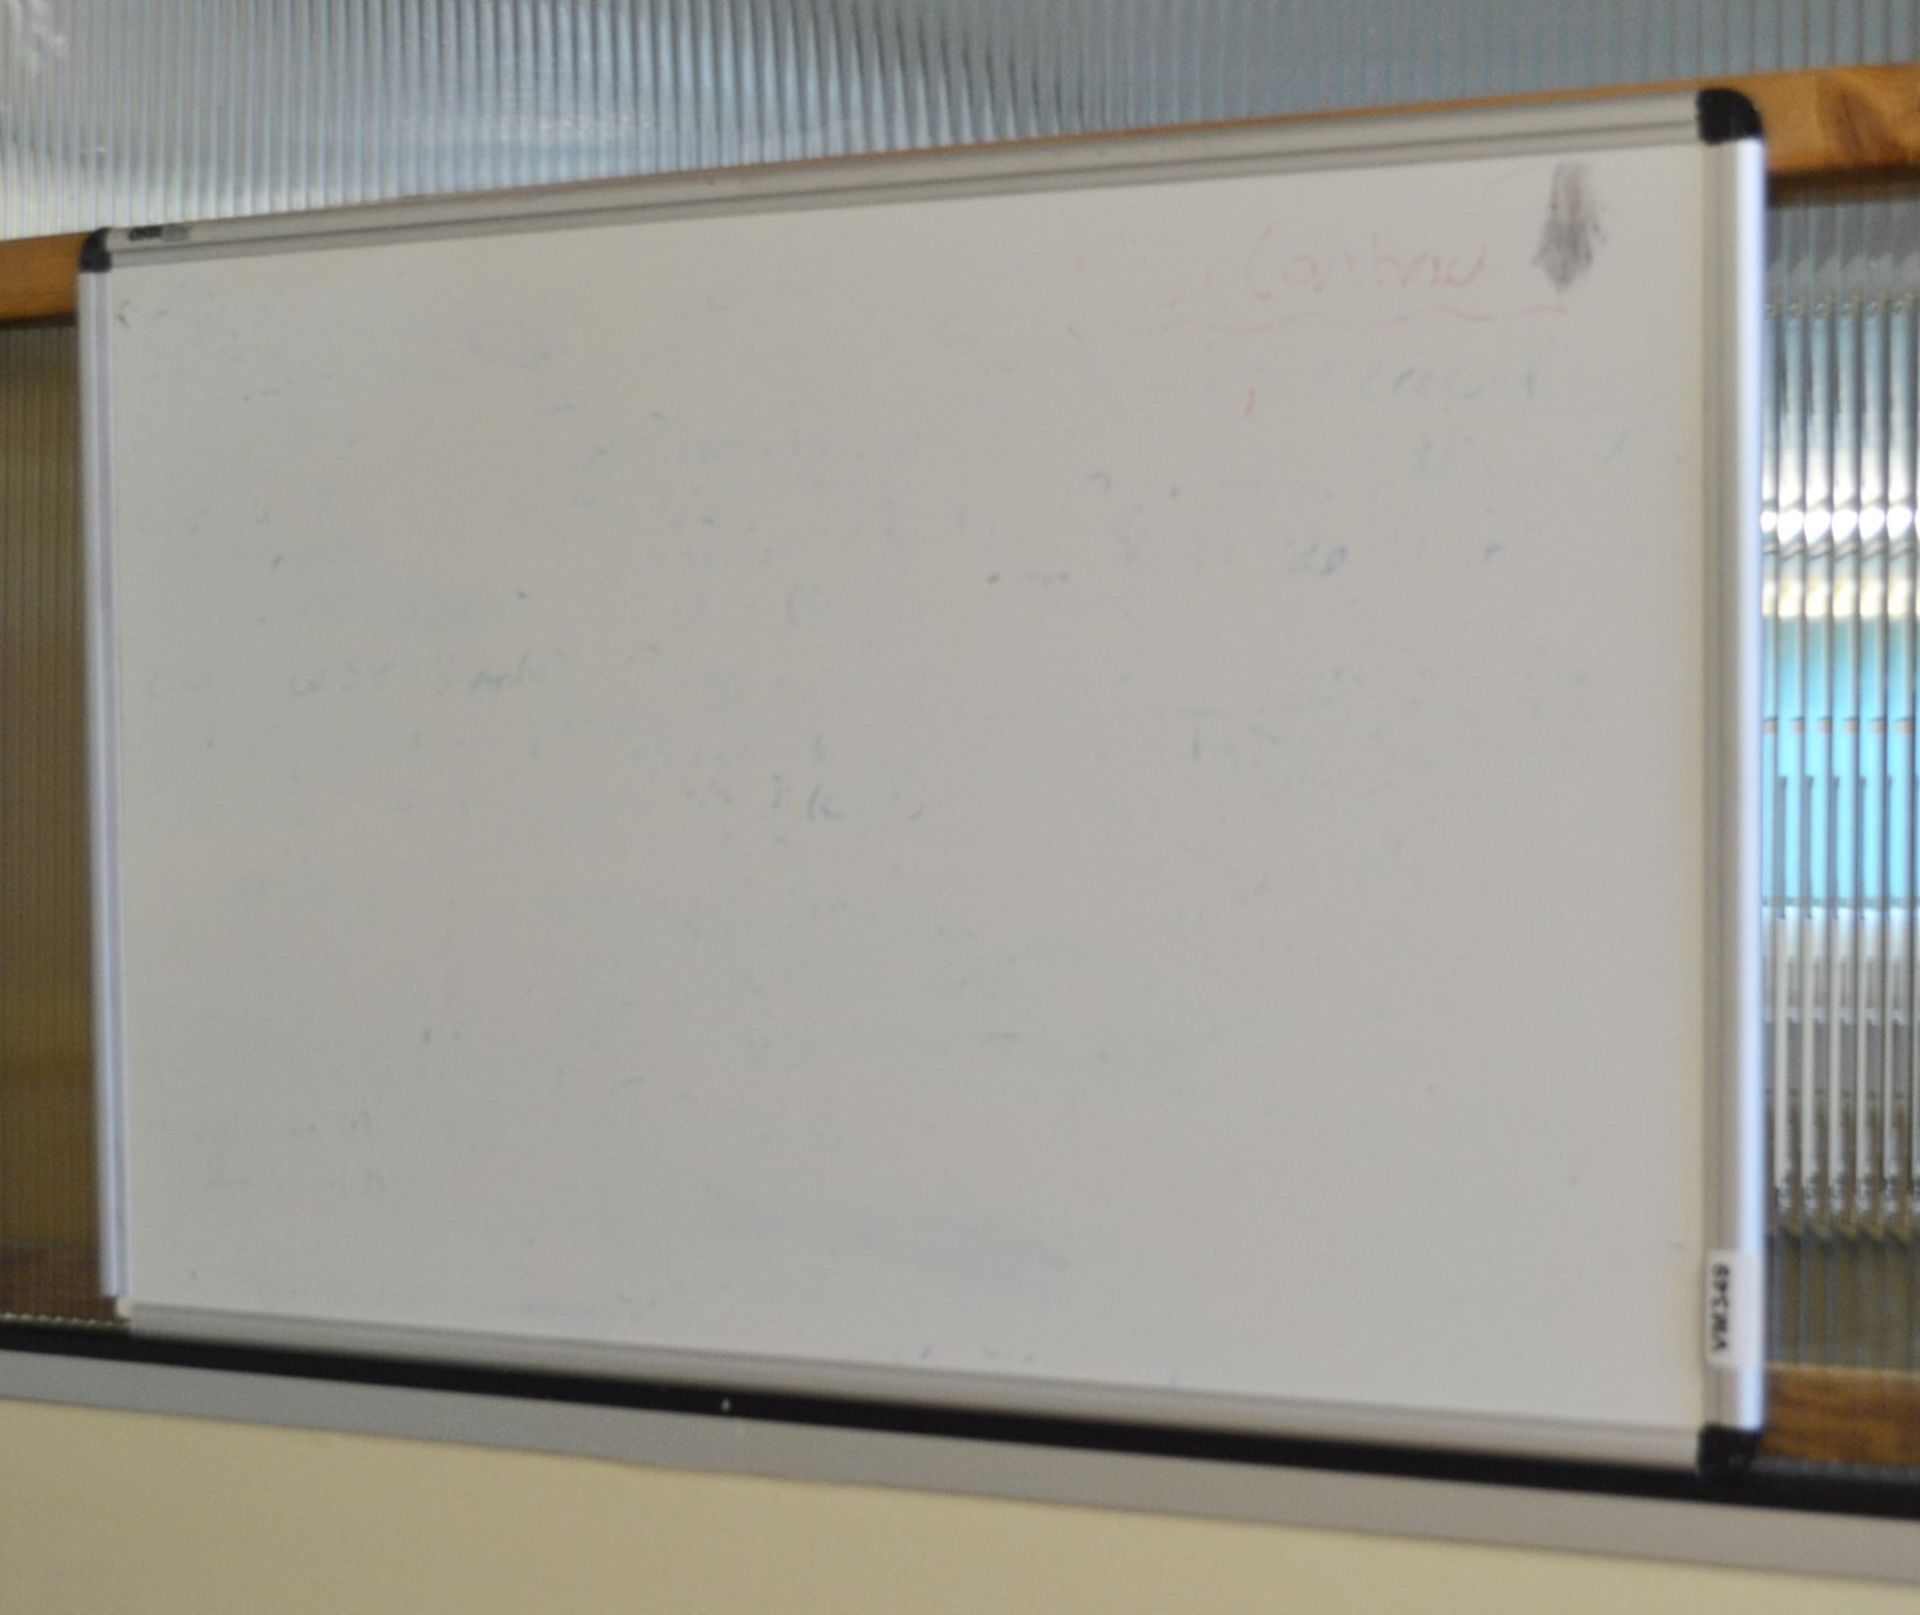 2 x Wall Mounted Whiteboards - Ref: VM349 - CL409 - Location: Wakefield WF16